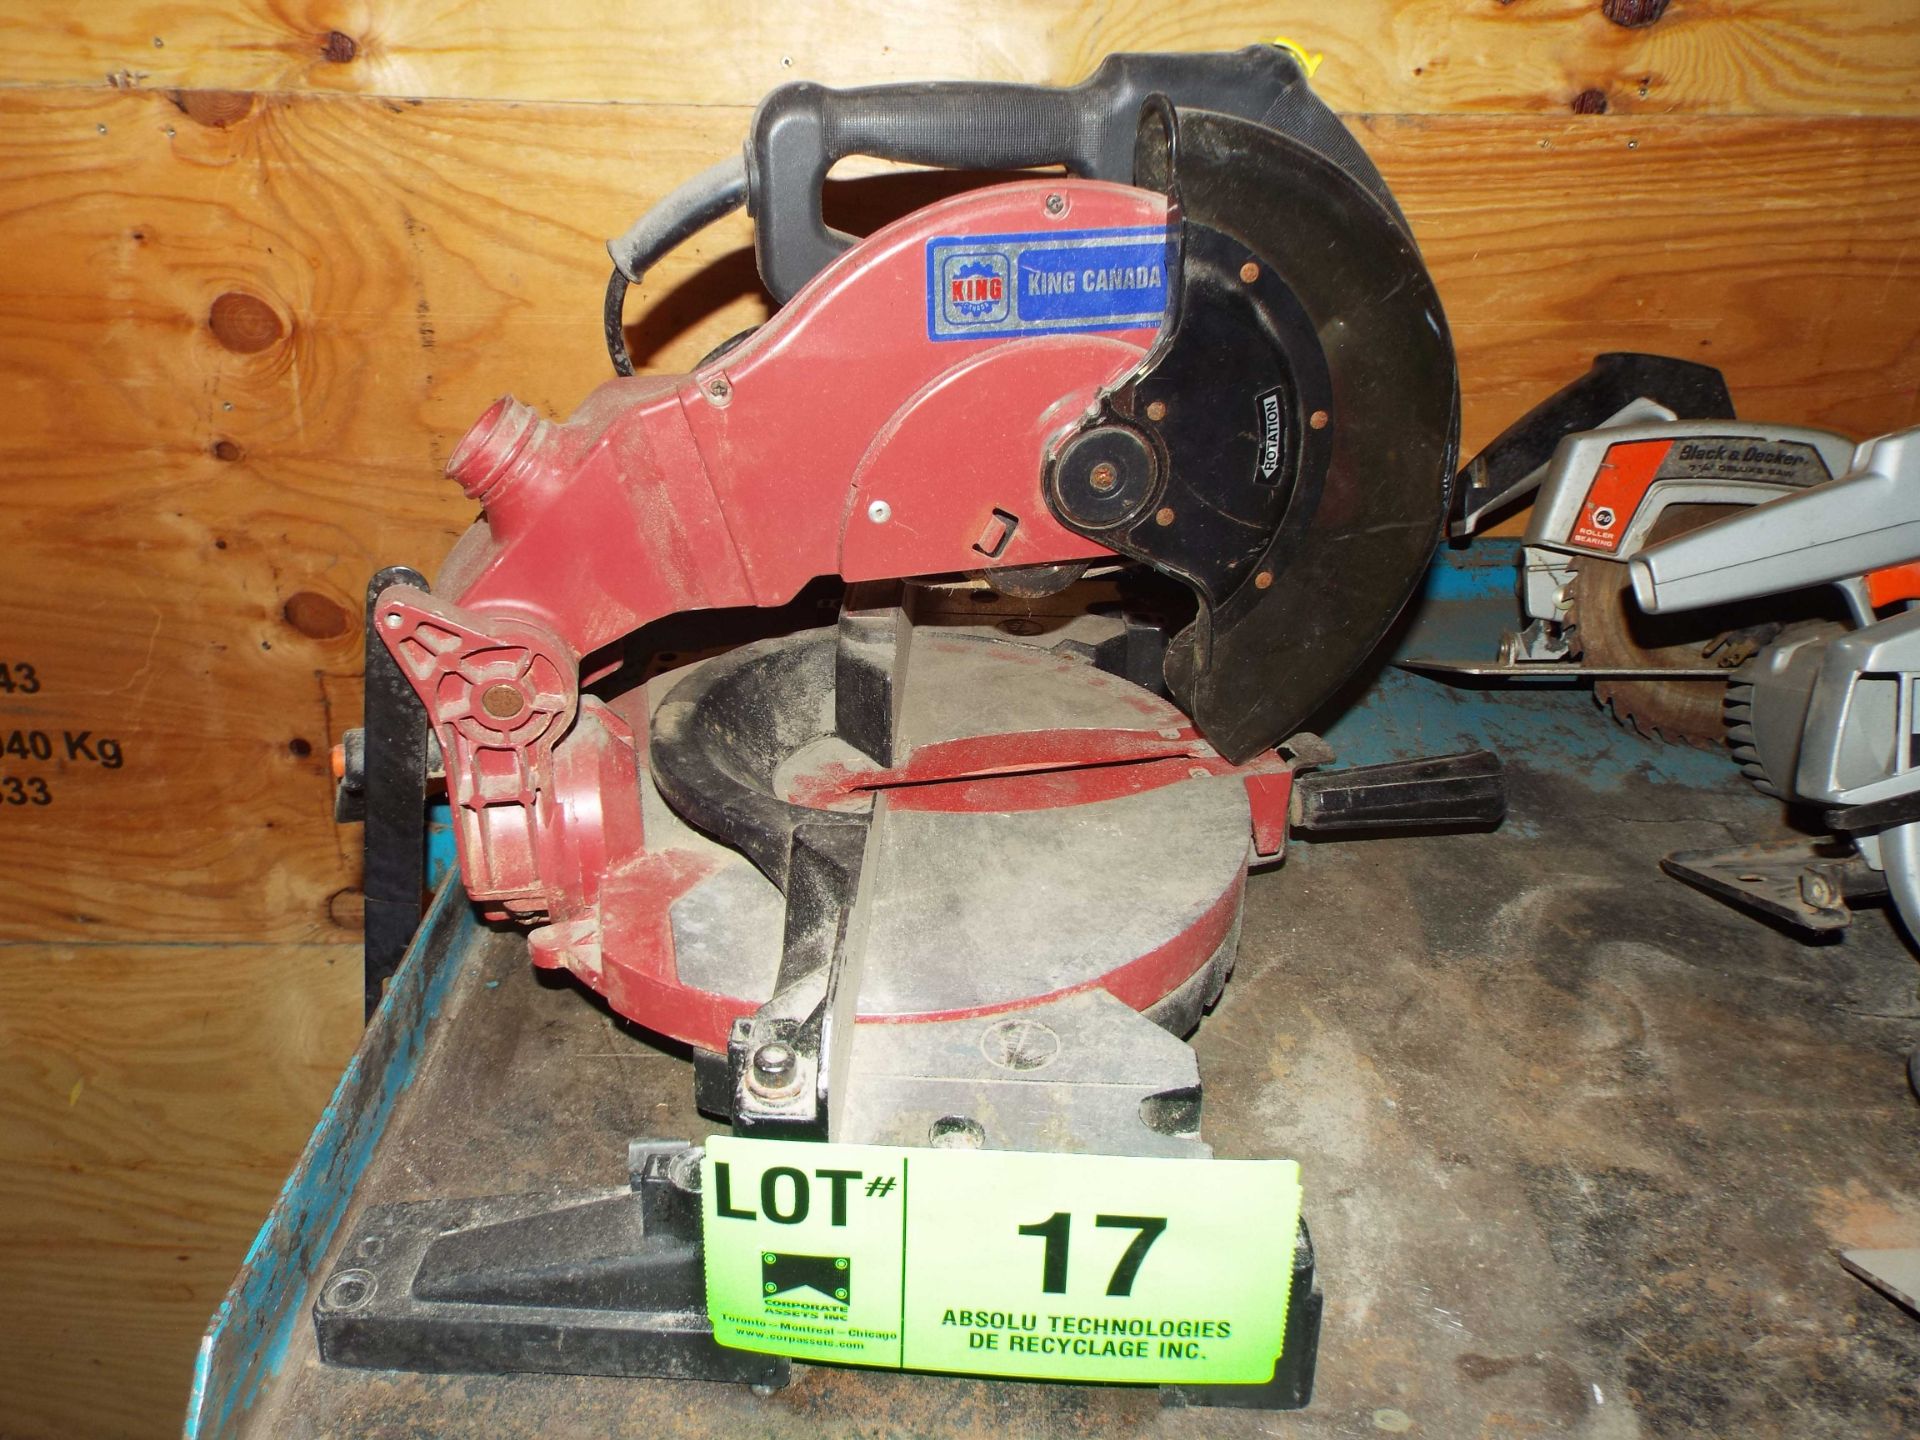 KING CANADA 8328 10" COMPOUND MITRE SAW